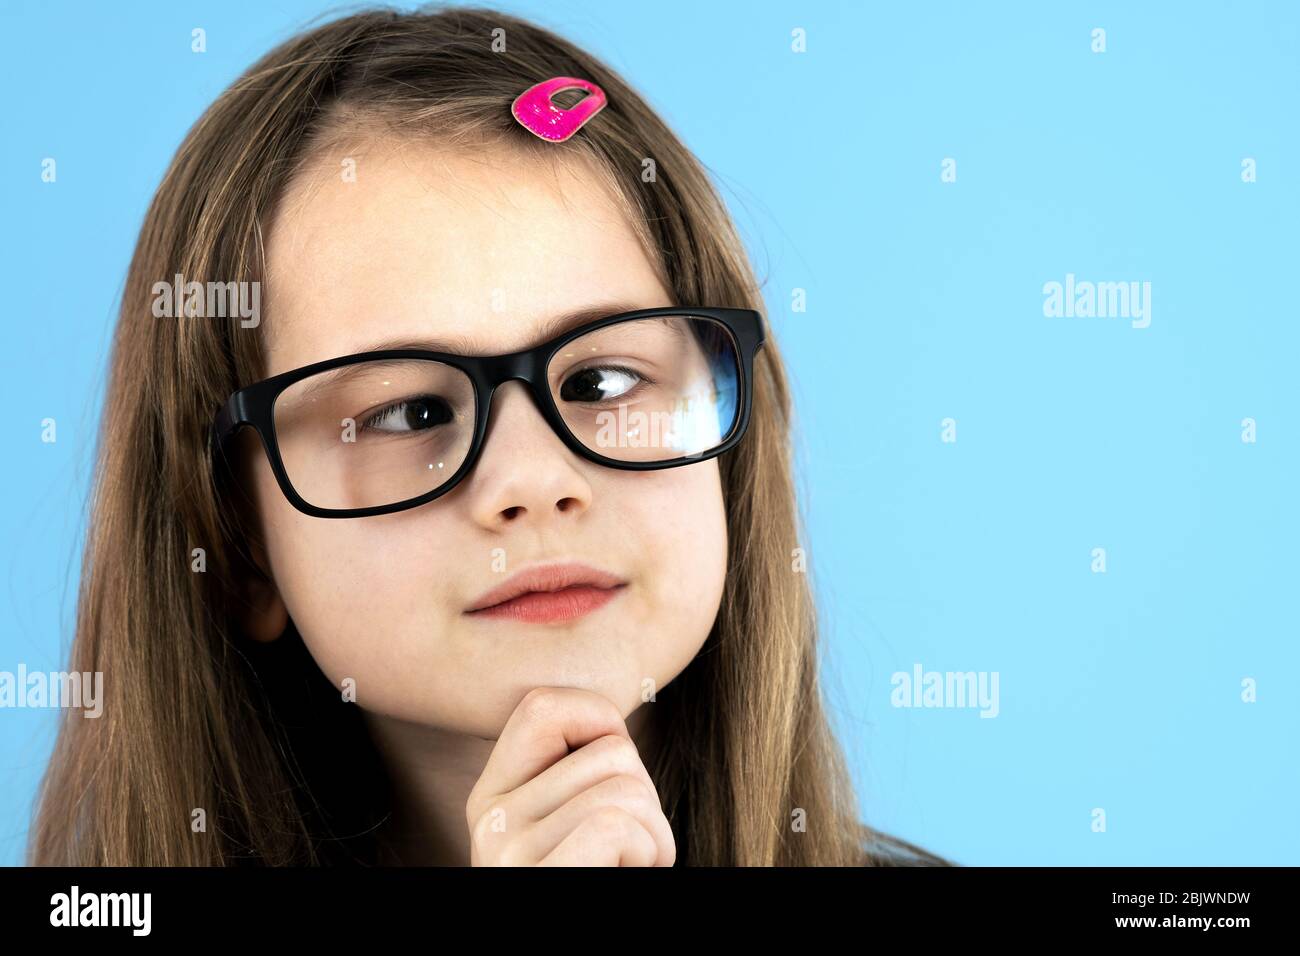 Close up portrait of a cross eyed child school girl wearing looking glasses isolated on blue background. Stock Photo